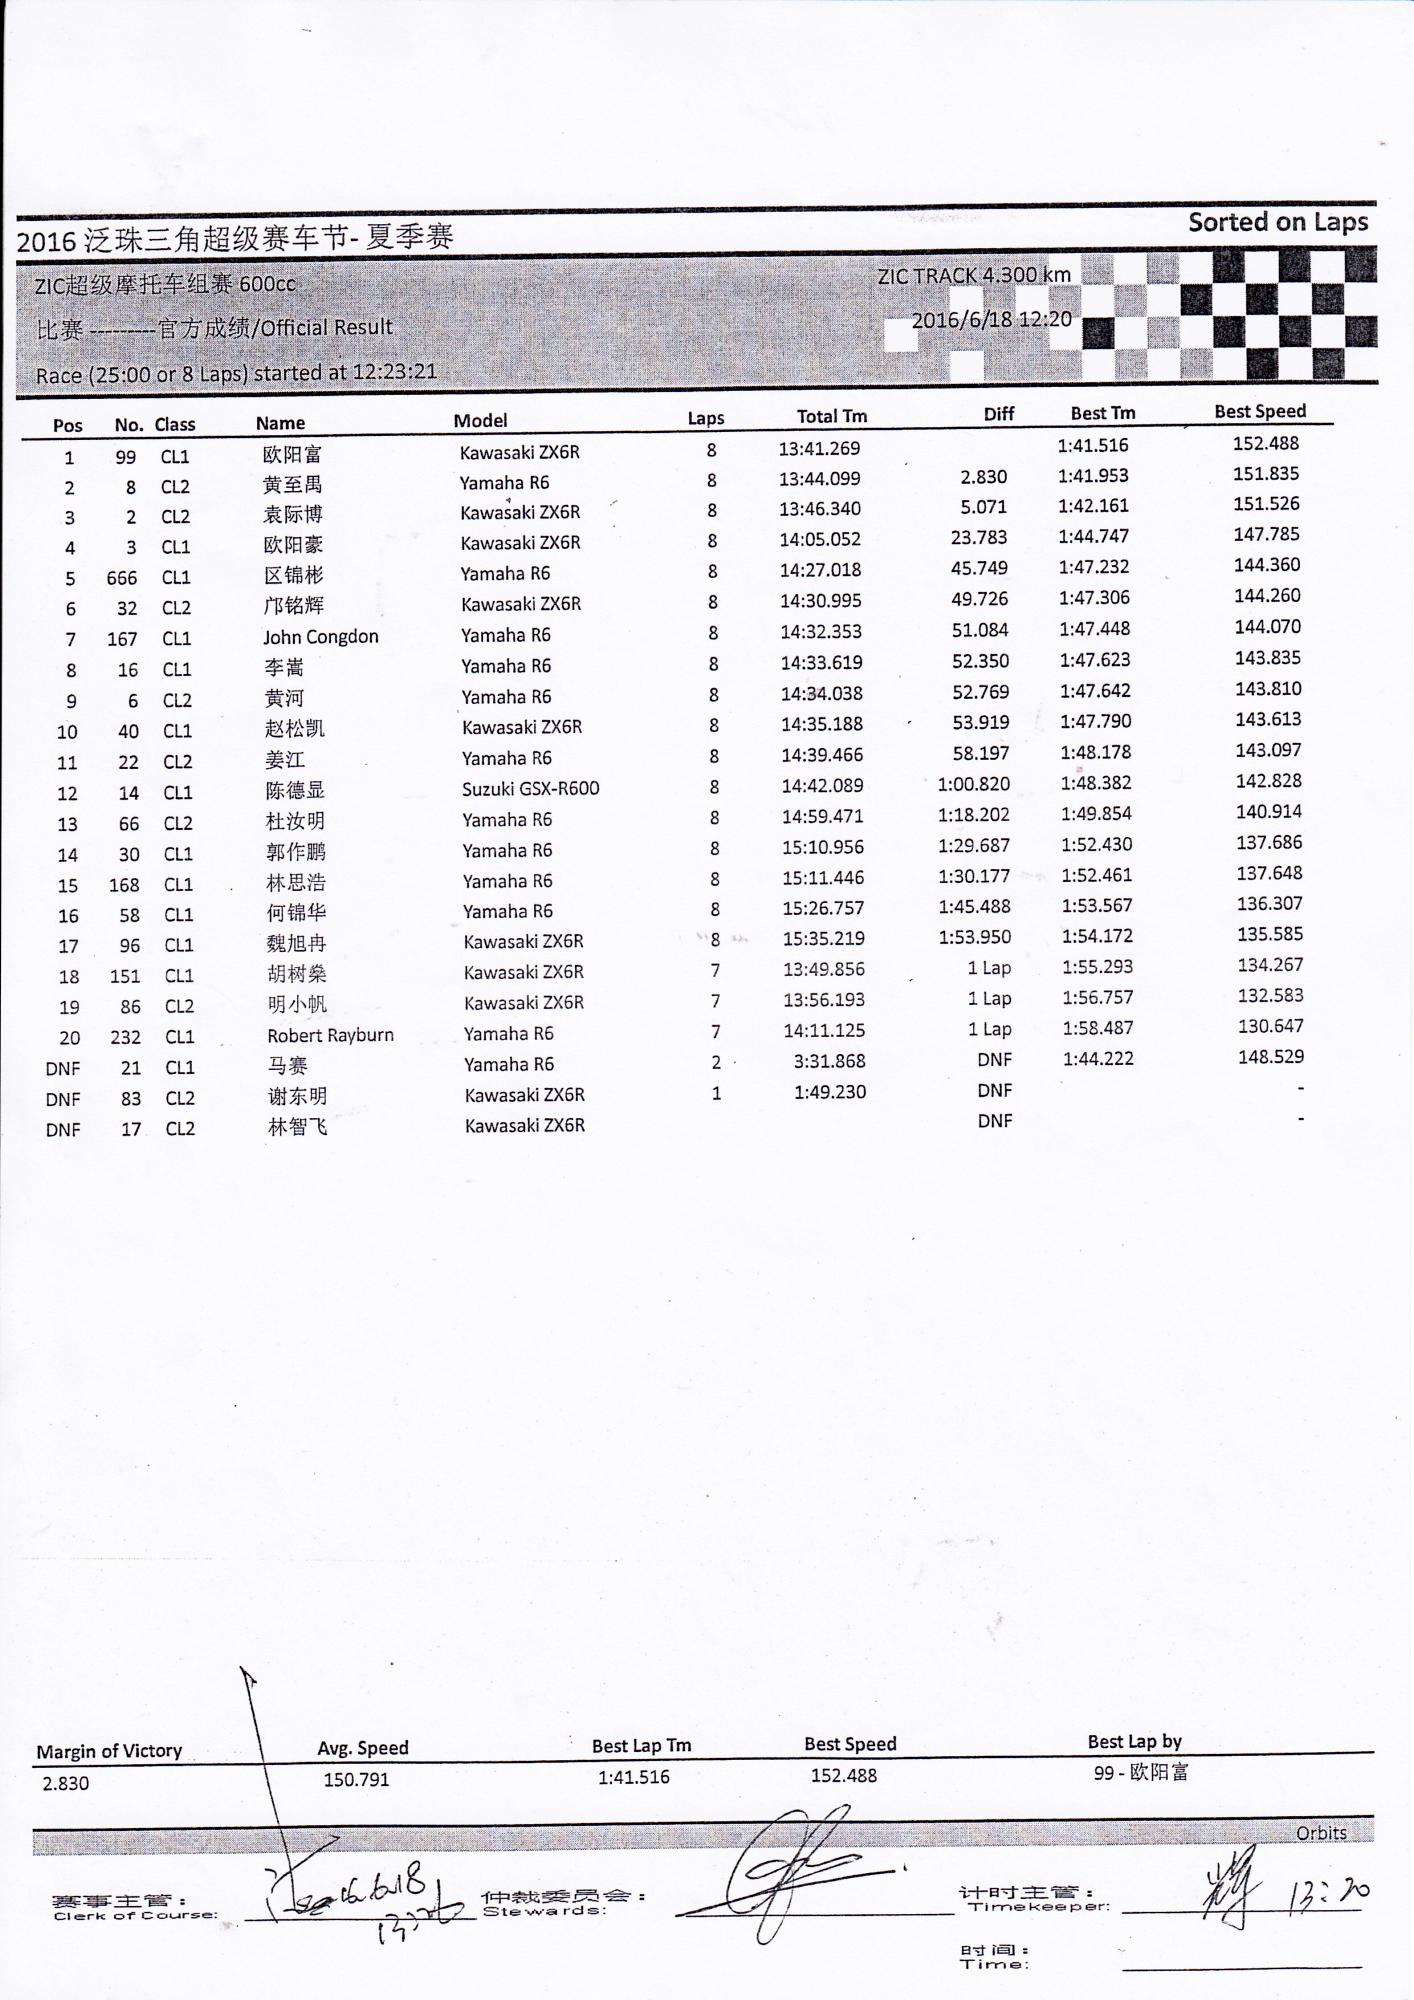 2016 PD2 ZIC Superbike 600cc race results